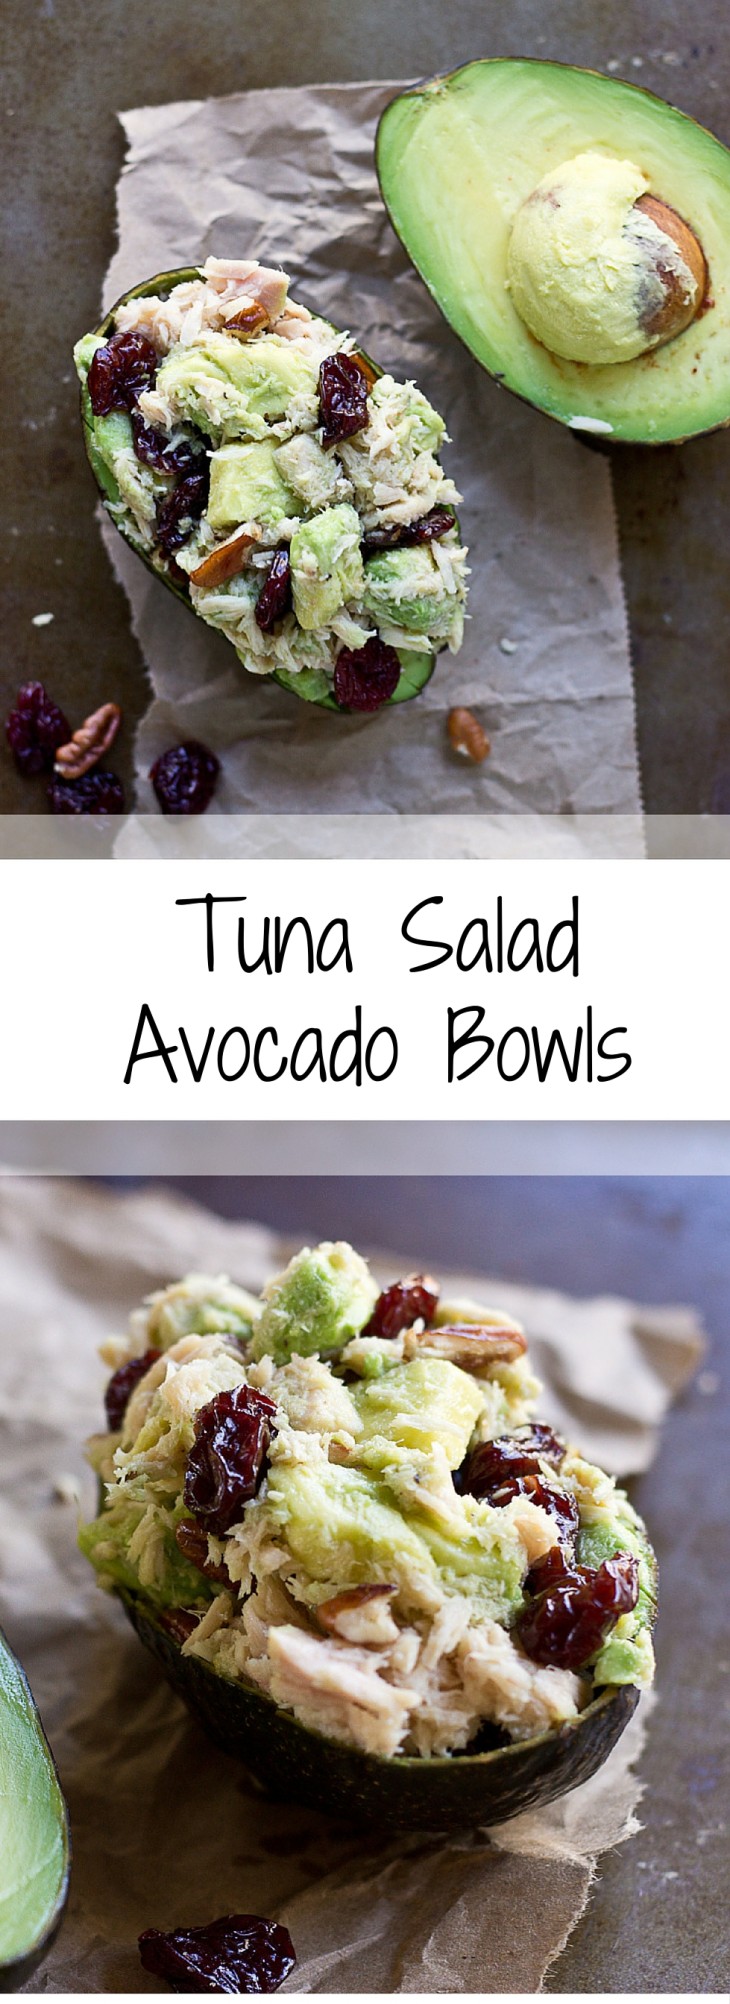 This is one POWER packed tuna salad recipe. These Tart Cherry Tuna Salad Avocado Bowls are filled with healthy fats from tuna, avocado, and pecans, it’s also rich in anthocyanins thanks to Montmorency tart cherries! Hello gawwwgeous!